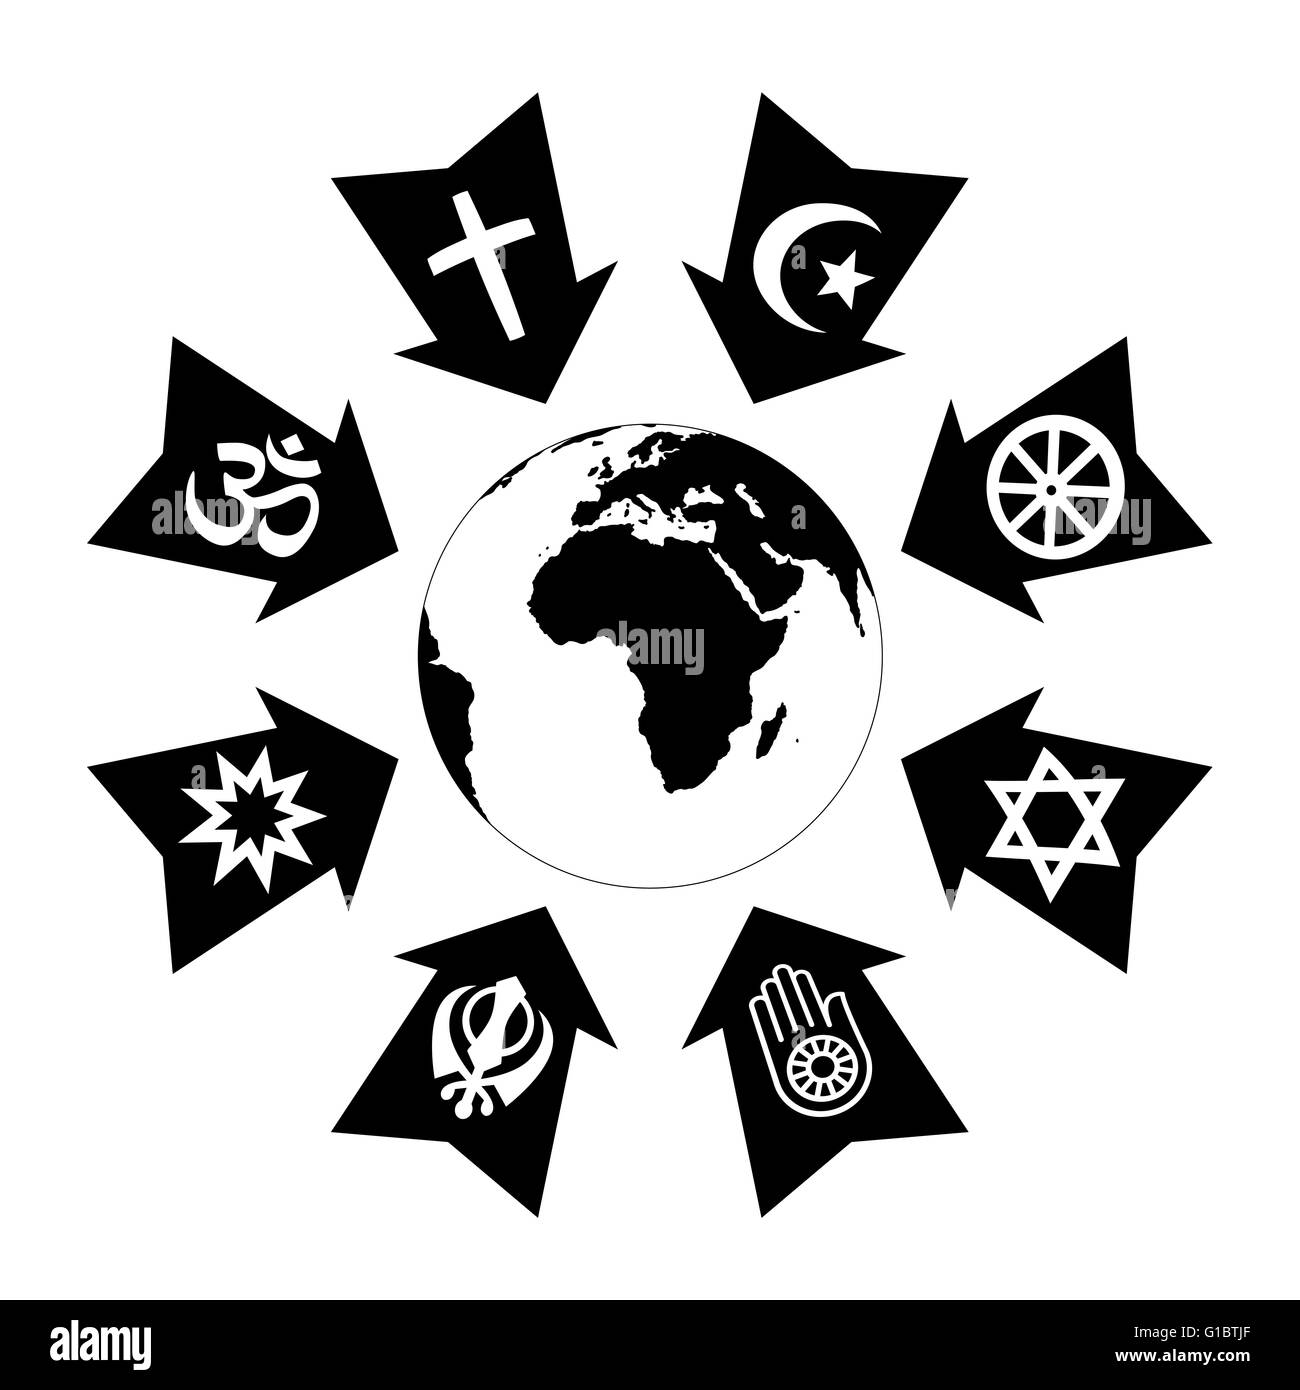 Pressure, stress and thread due to religion, depicted as black arrows with religious symbols pointing at planet earth. Stock Photo